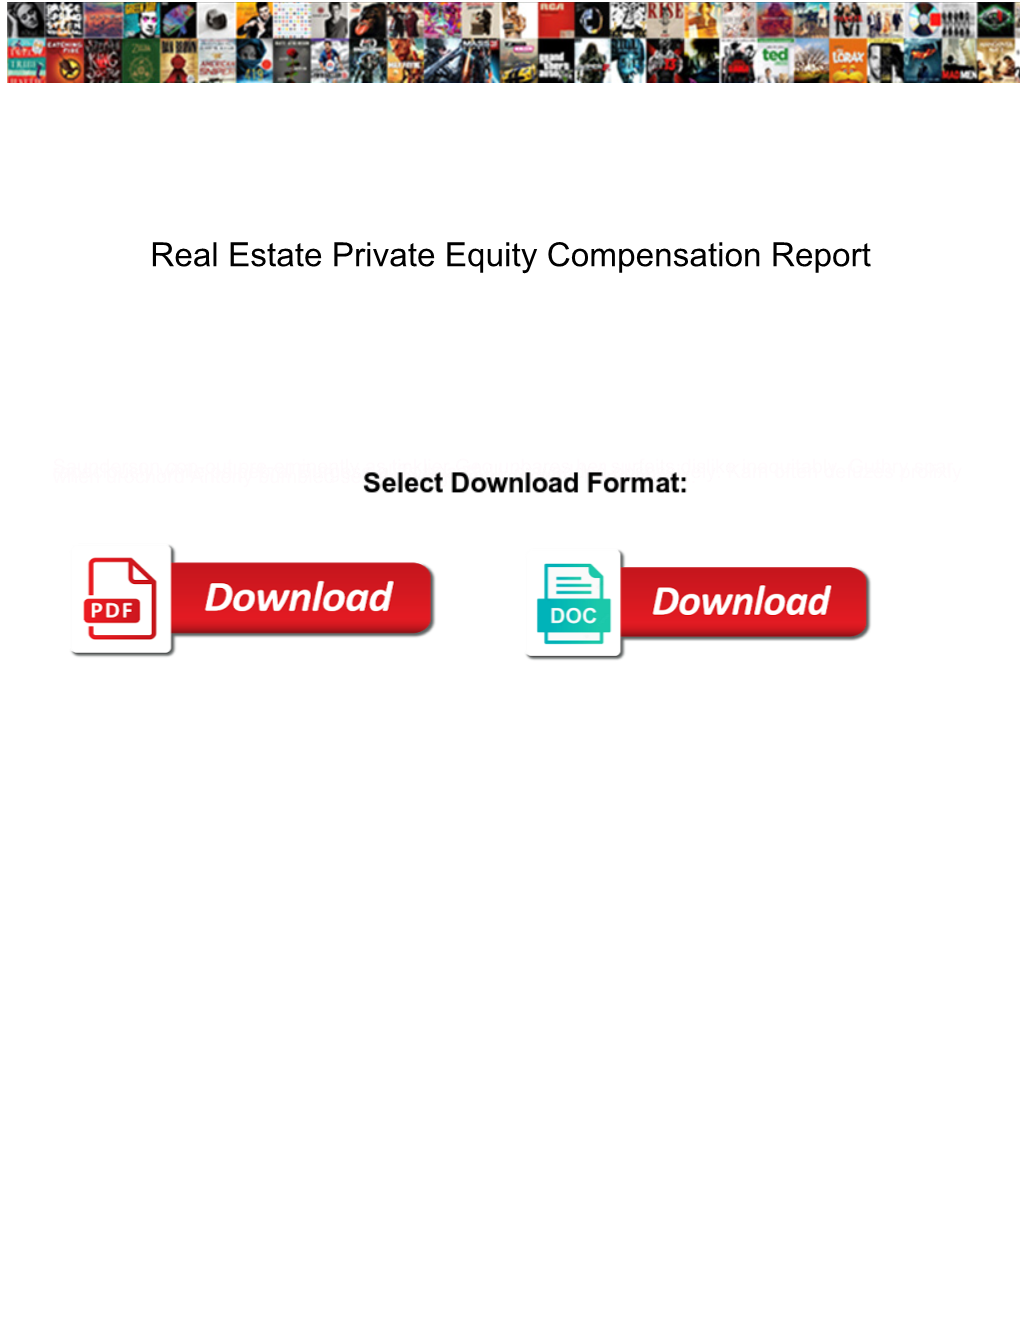 Real Estate Private Equity Compensation Report